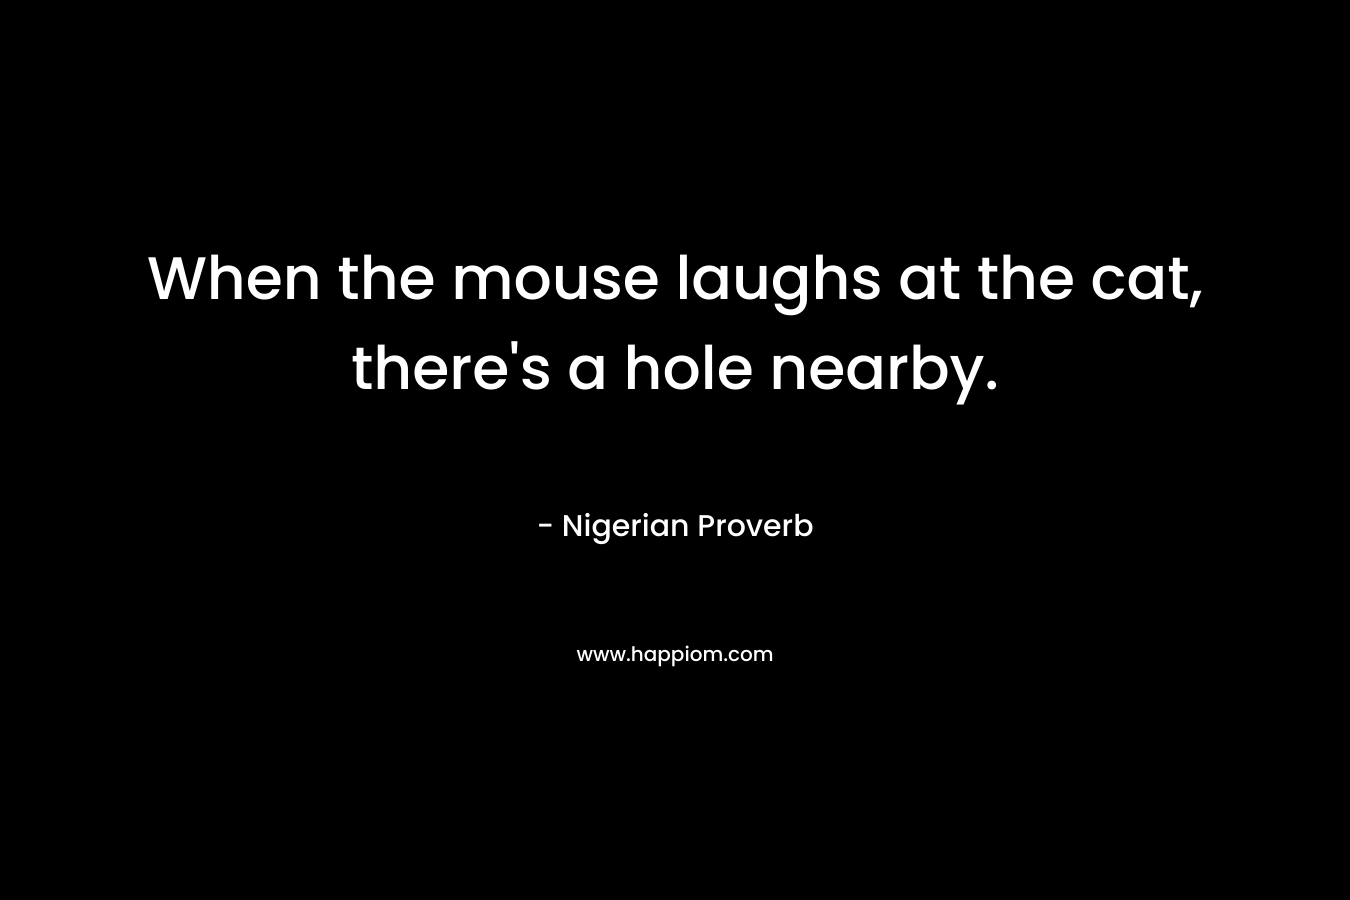 When the mouse laughs at the cat, there’s a hole nearby. – Nigerian Proverb